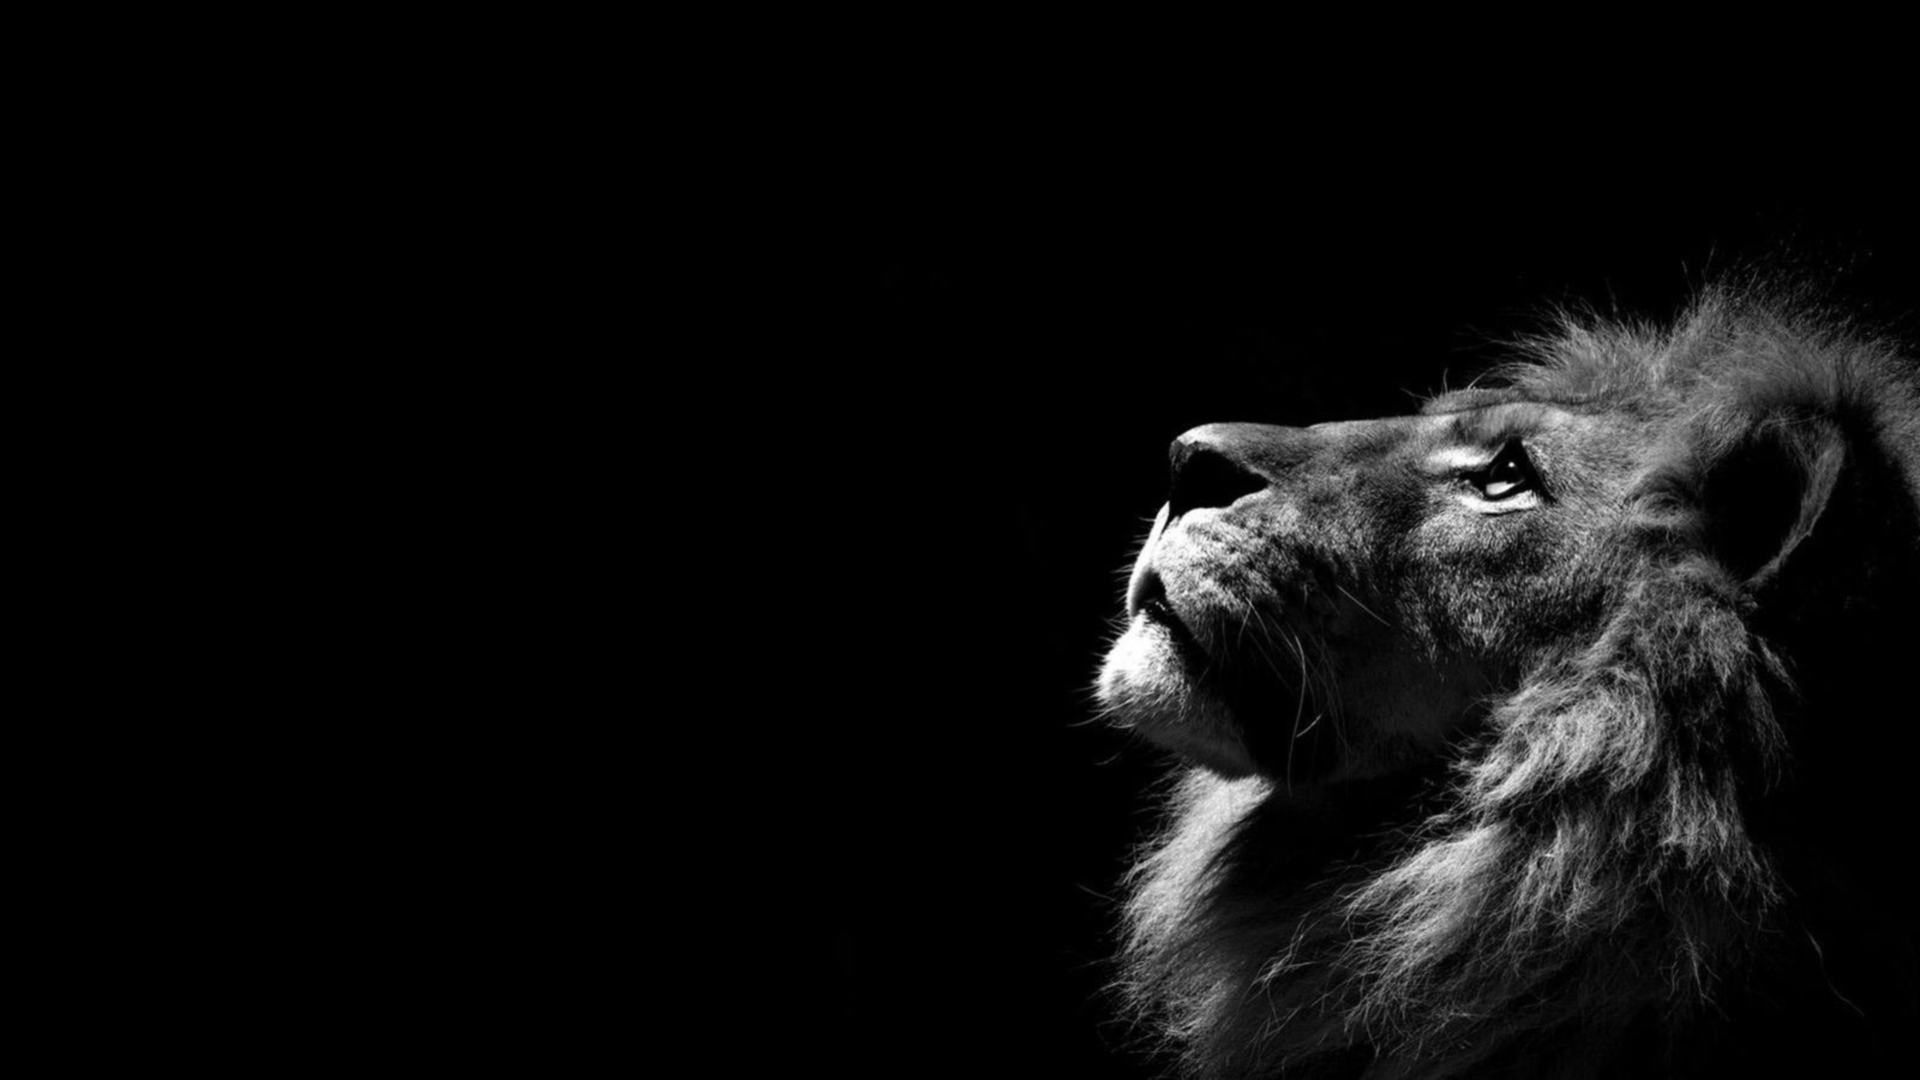 Reality Lion Hd Pics For Pc & Mac, Laptop, Tablet, - Lions In Black Background - HD Wallpaper 